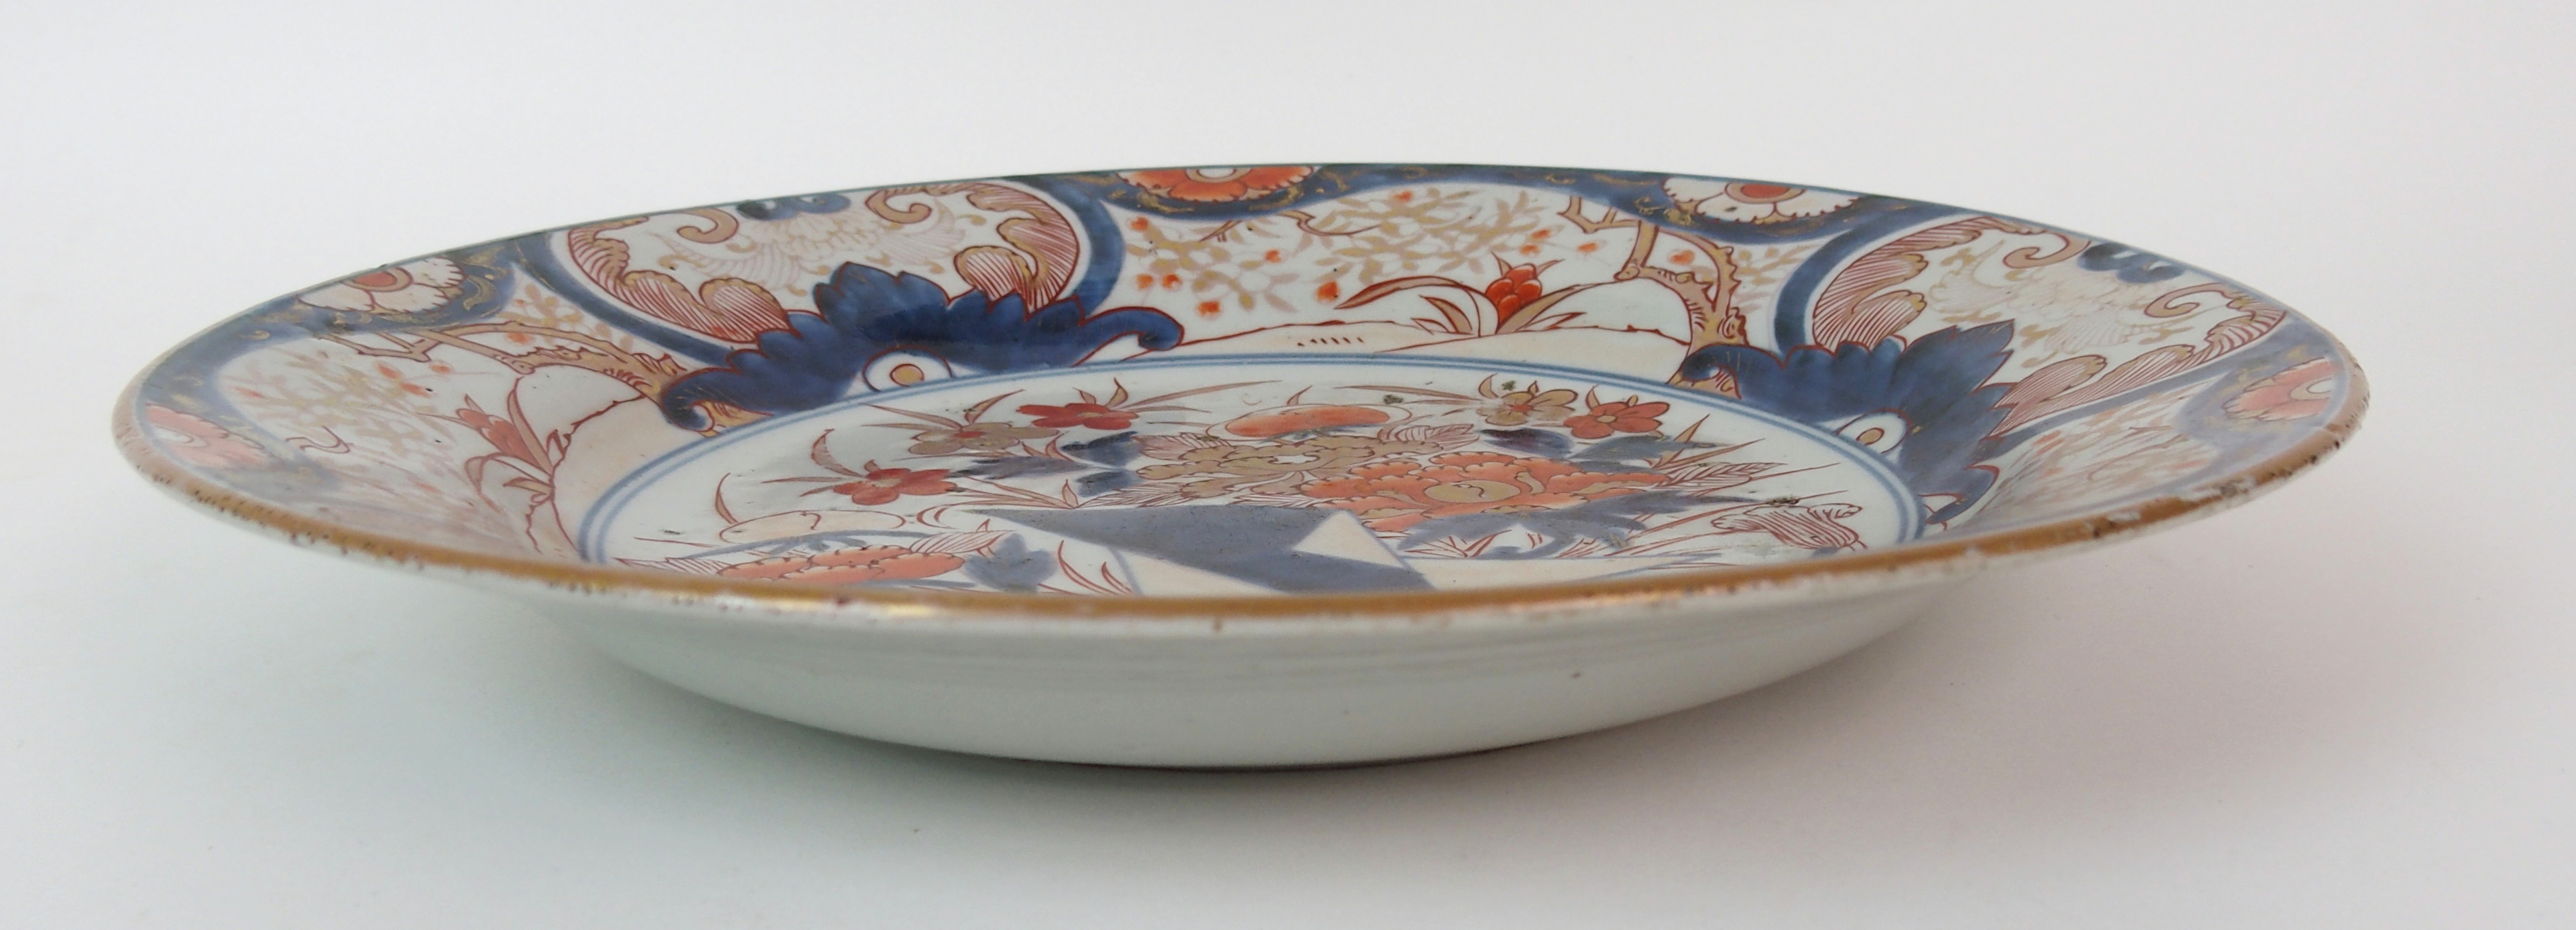 An Imari dish painted with chrysanthemum within foliate scroll cartouches, 18th/19th Century, 30cm - Image 6 of 10